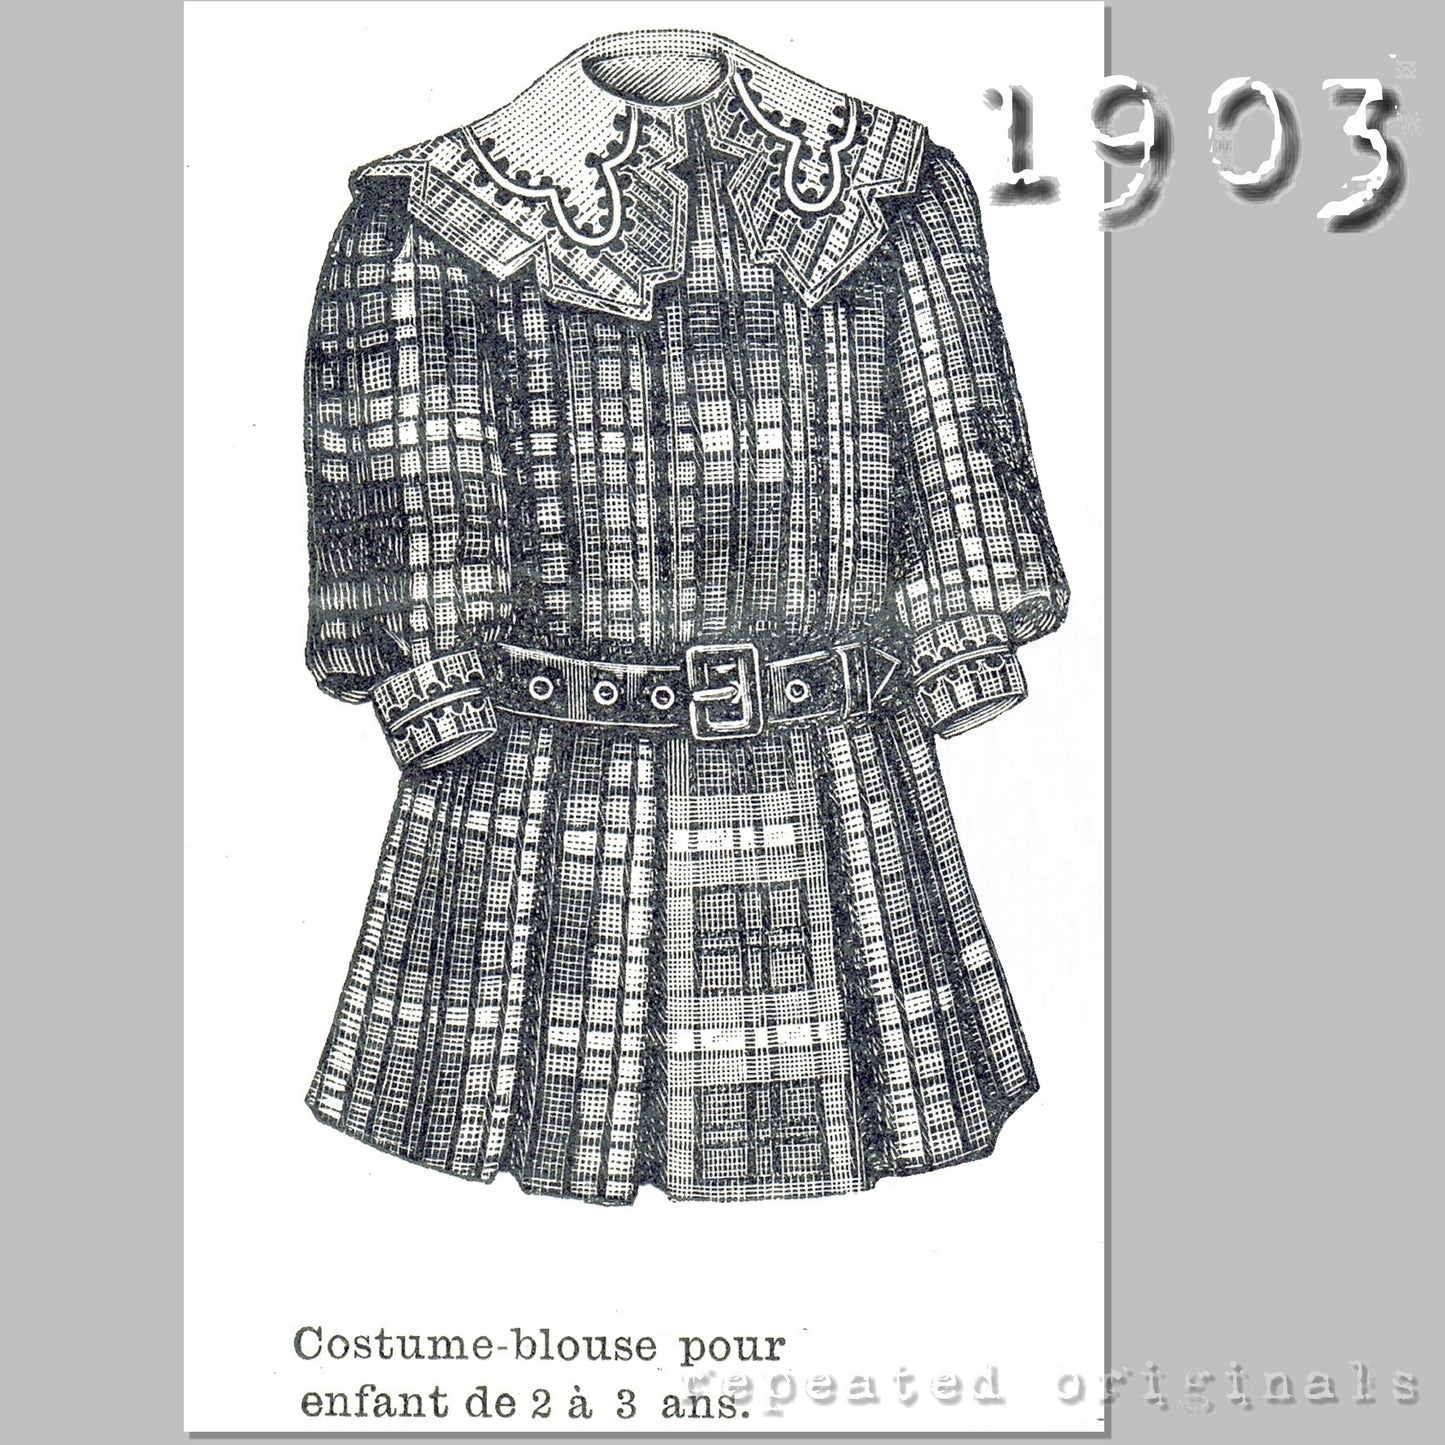 1903 Blouse for Children 2 to 3 Years Sewing Pattern - INSTANT DOWNLOAD PDF